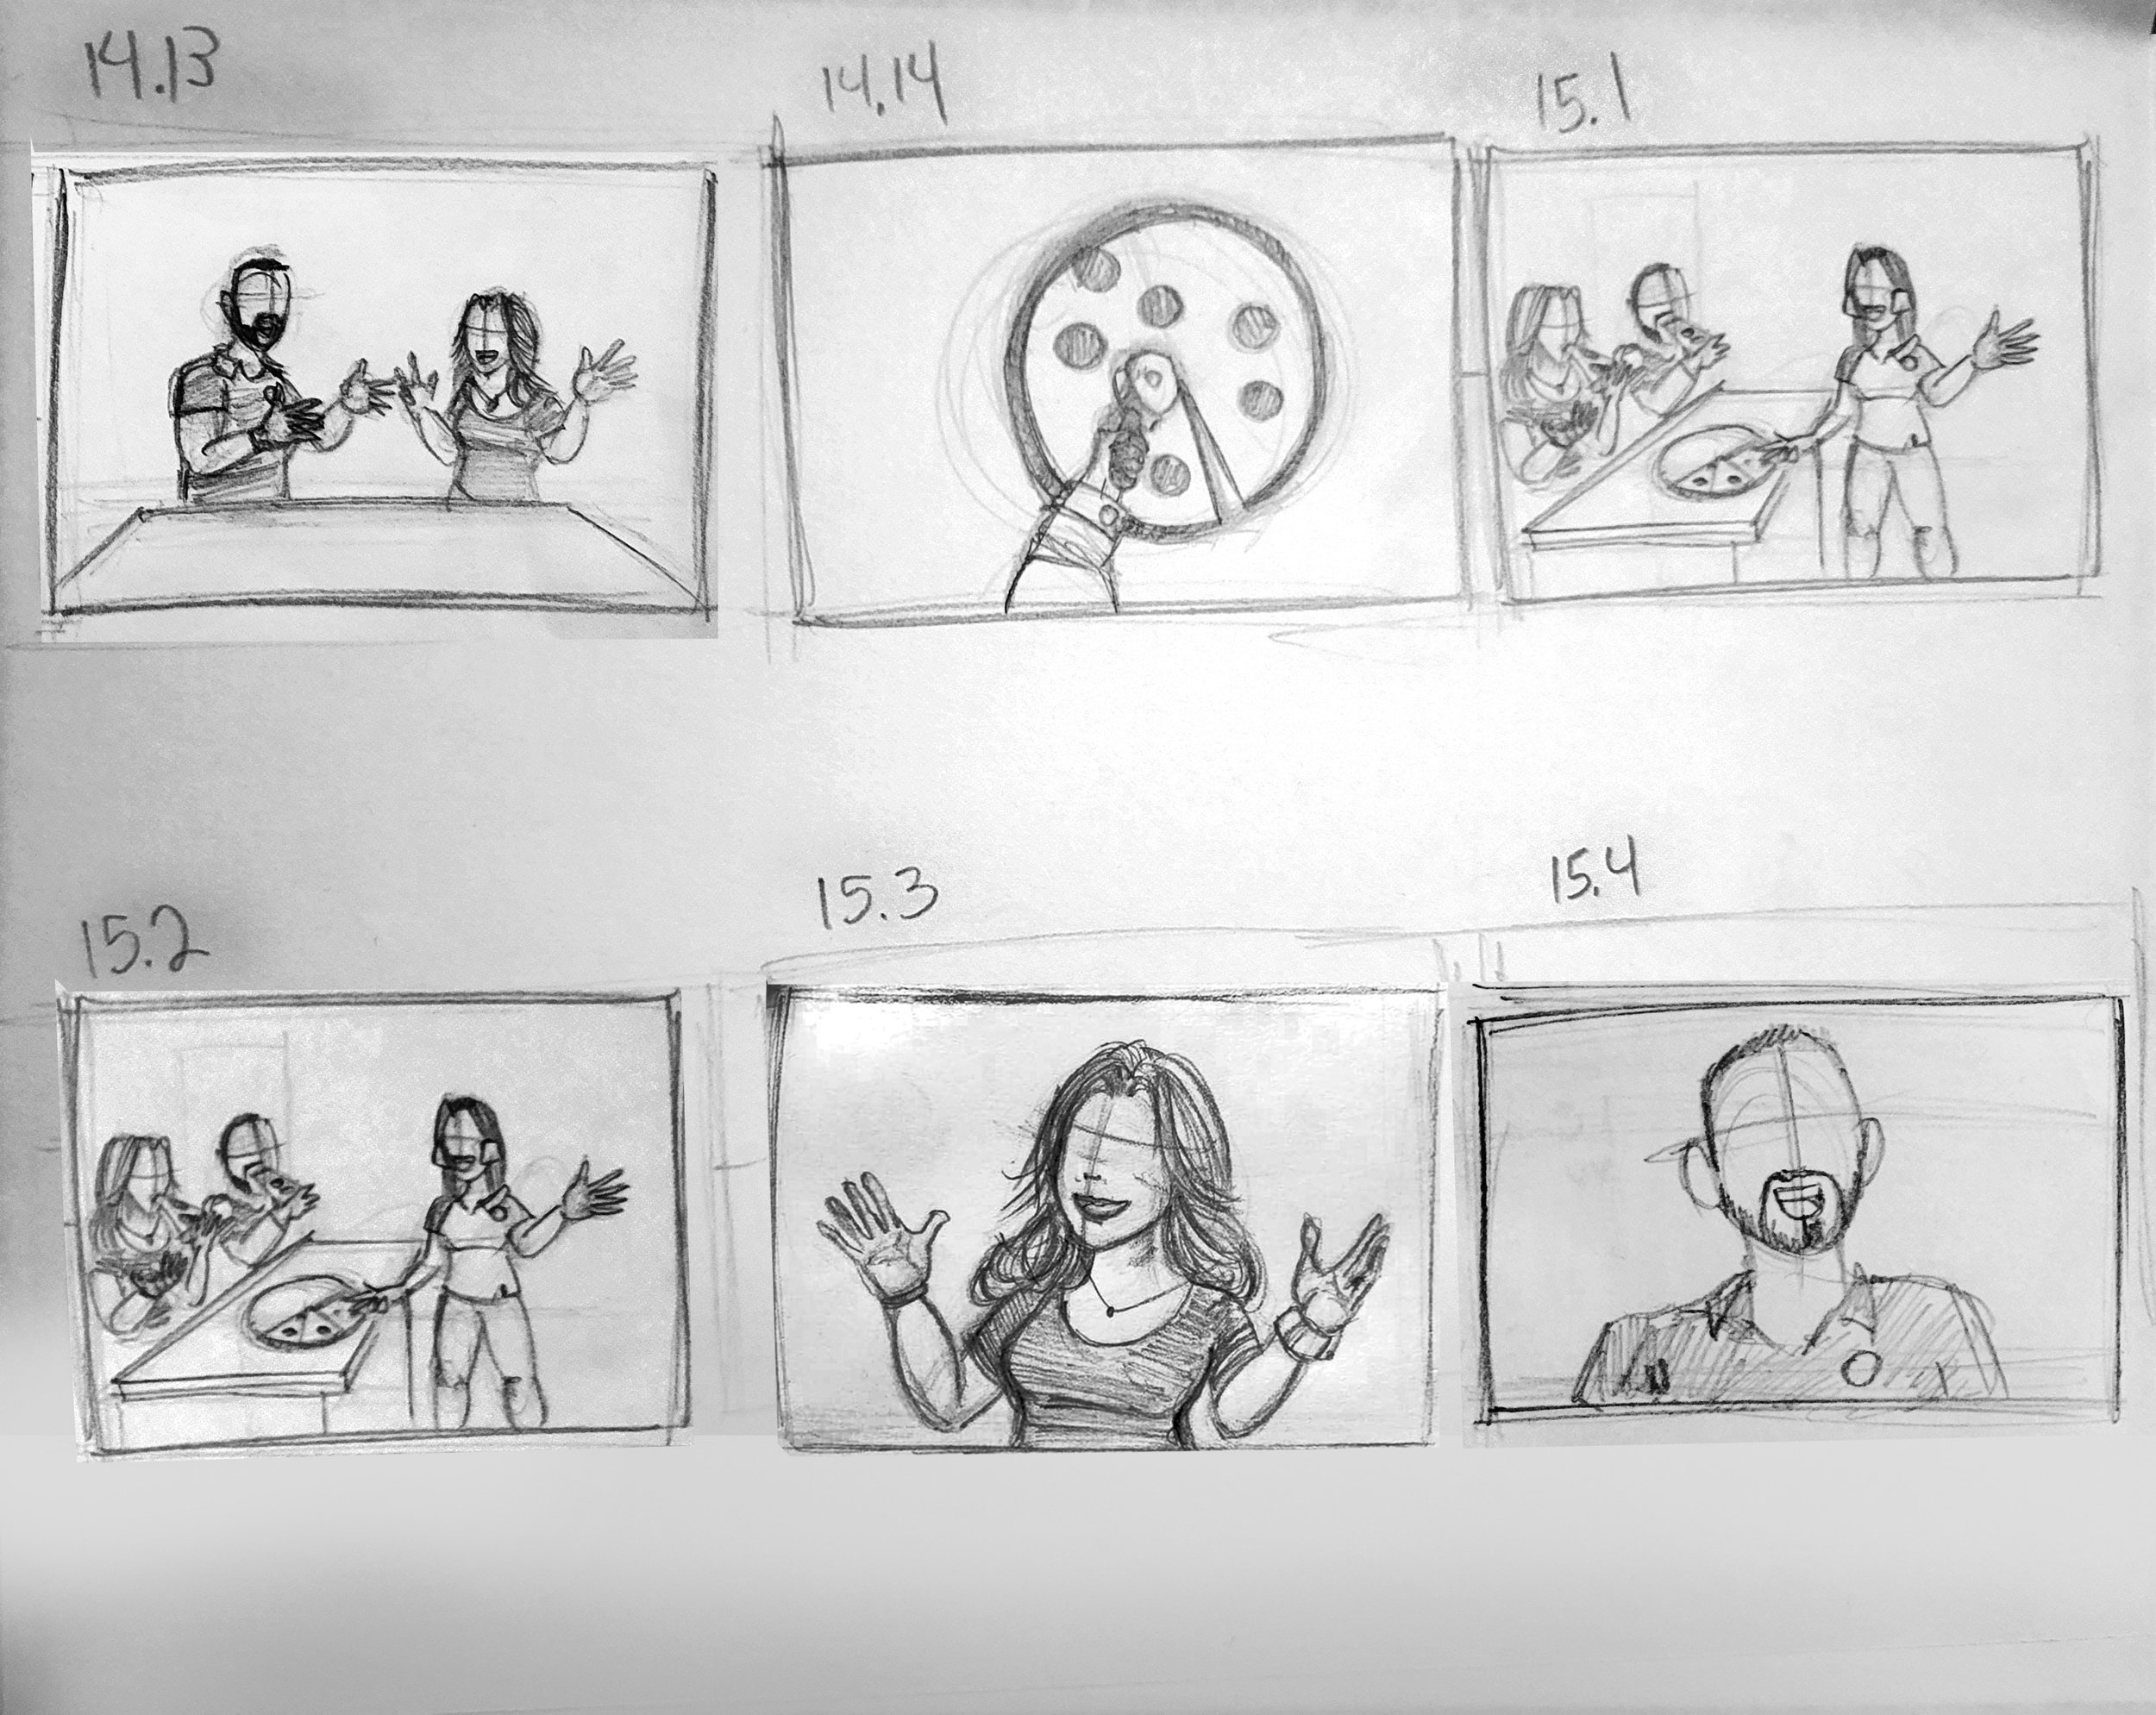 WR_Real_Suite_Eats_S1_E2_StoryBoard_Frames_14_13_to_15_4.jpg